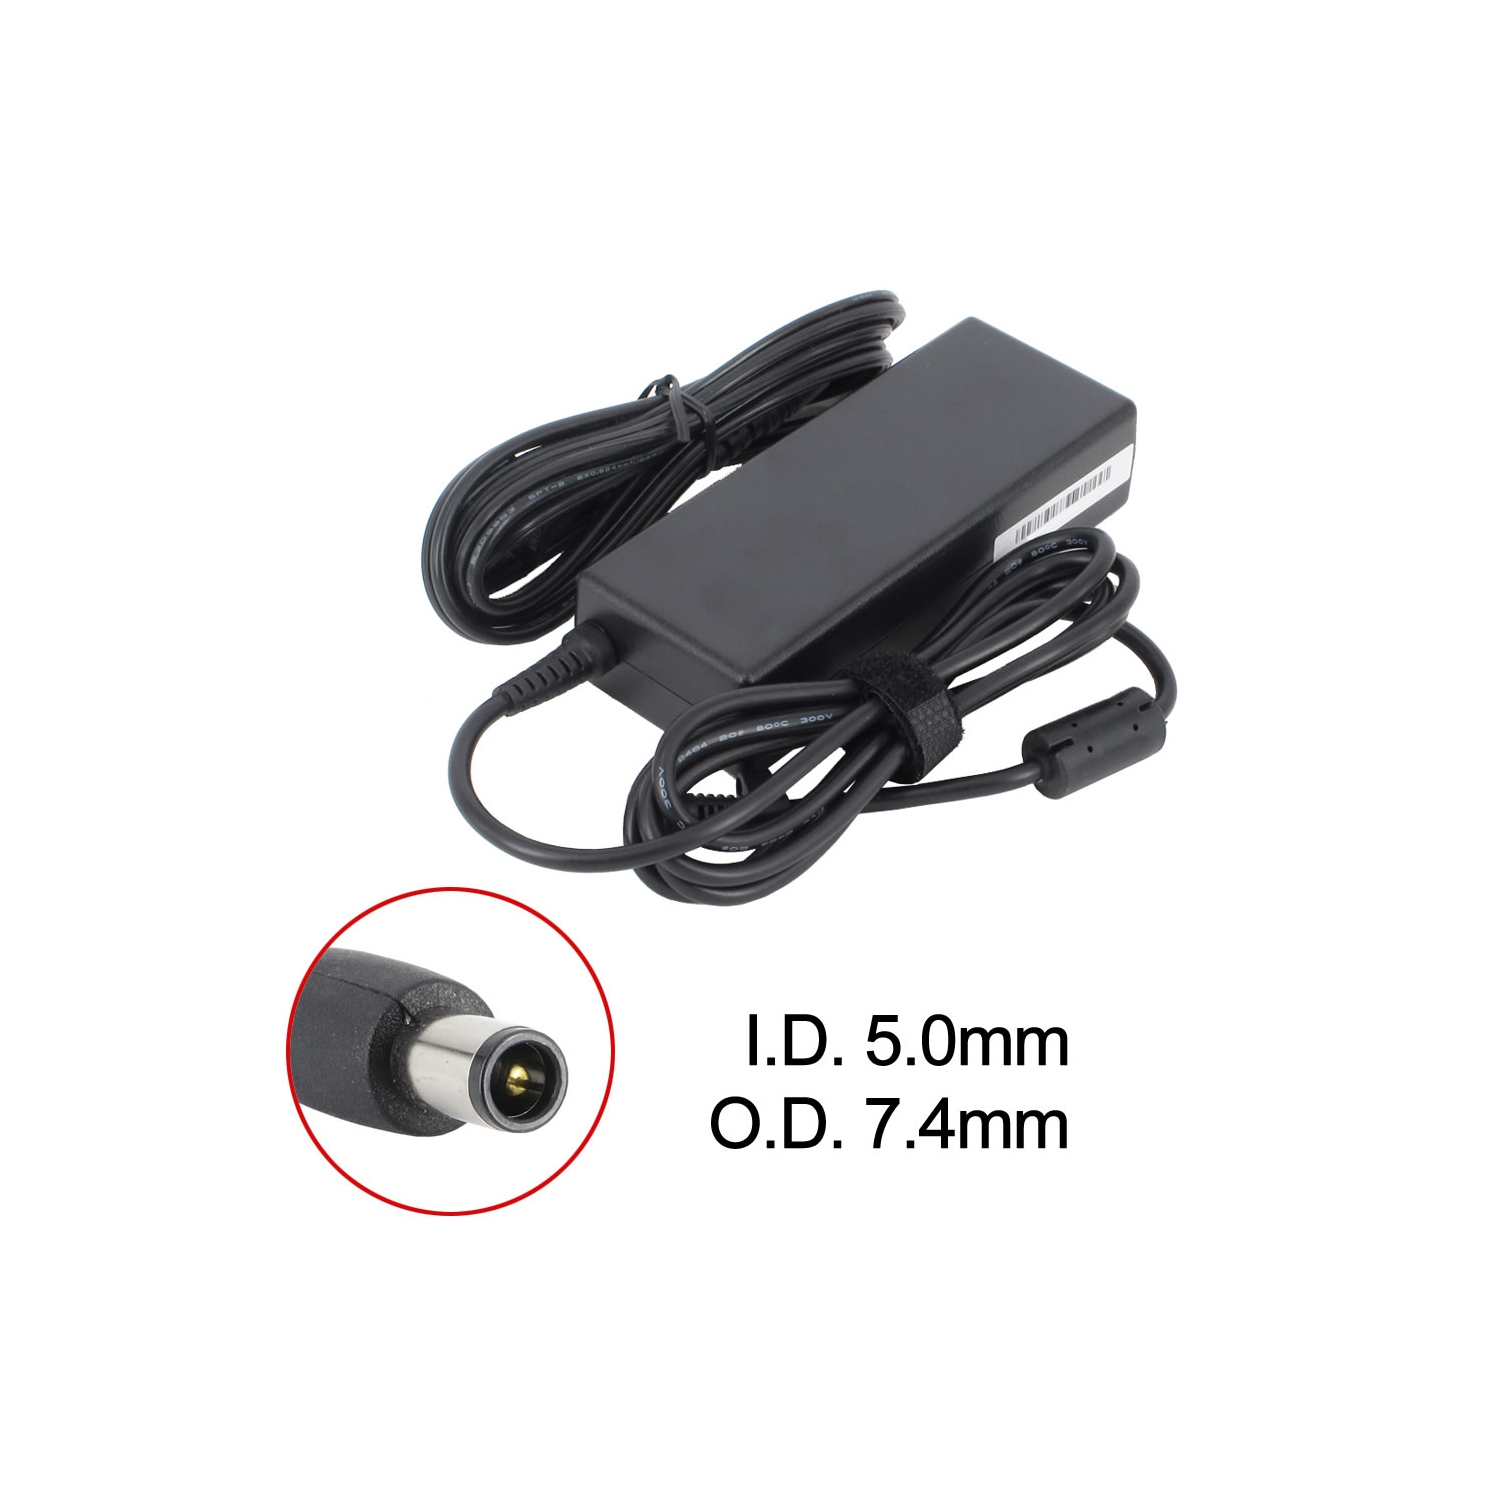 New Laptop AC Adapter for HP Pavilion dv6t-4000 CTO, 391173-001, 463552-003, 577051-001, ED494AAR, PA-1900-08H2, PPP014L-S